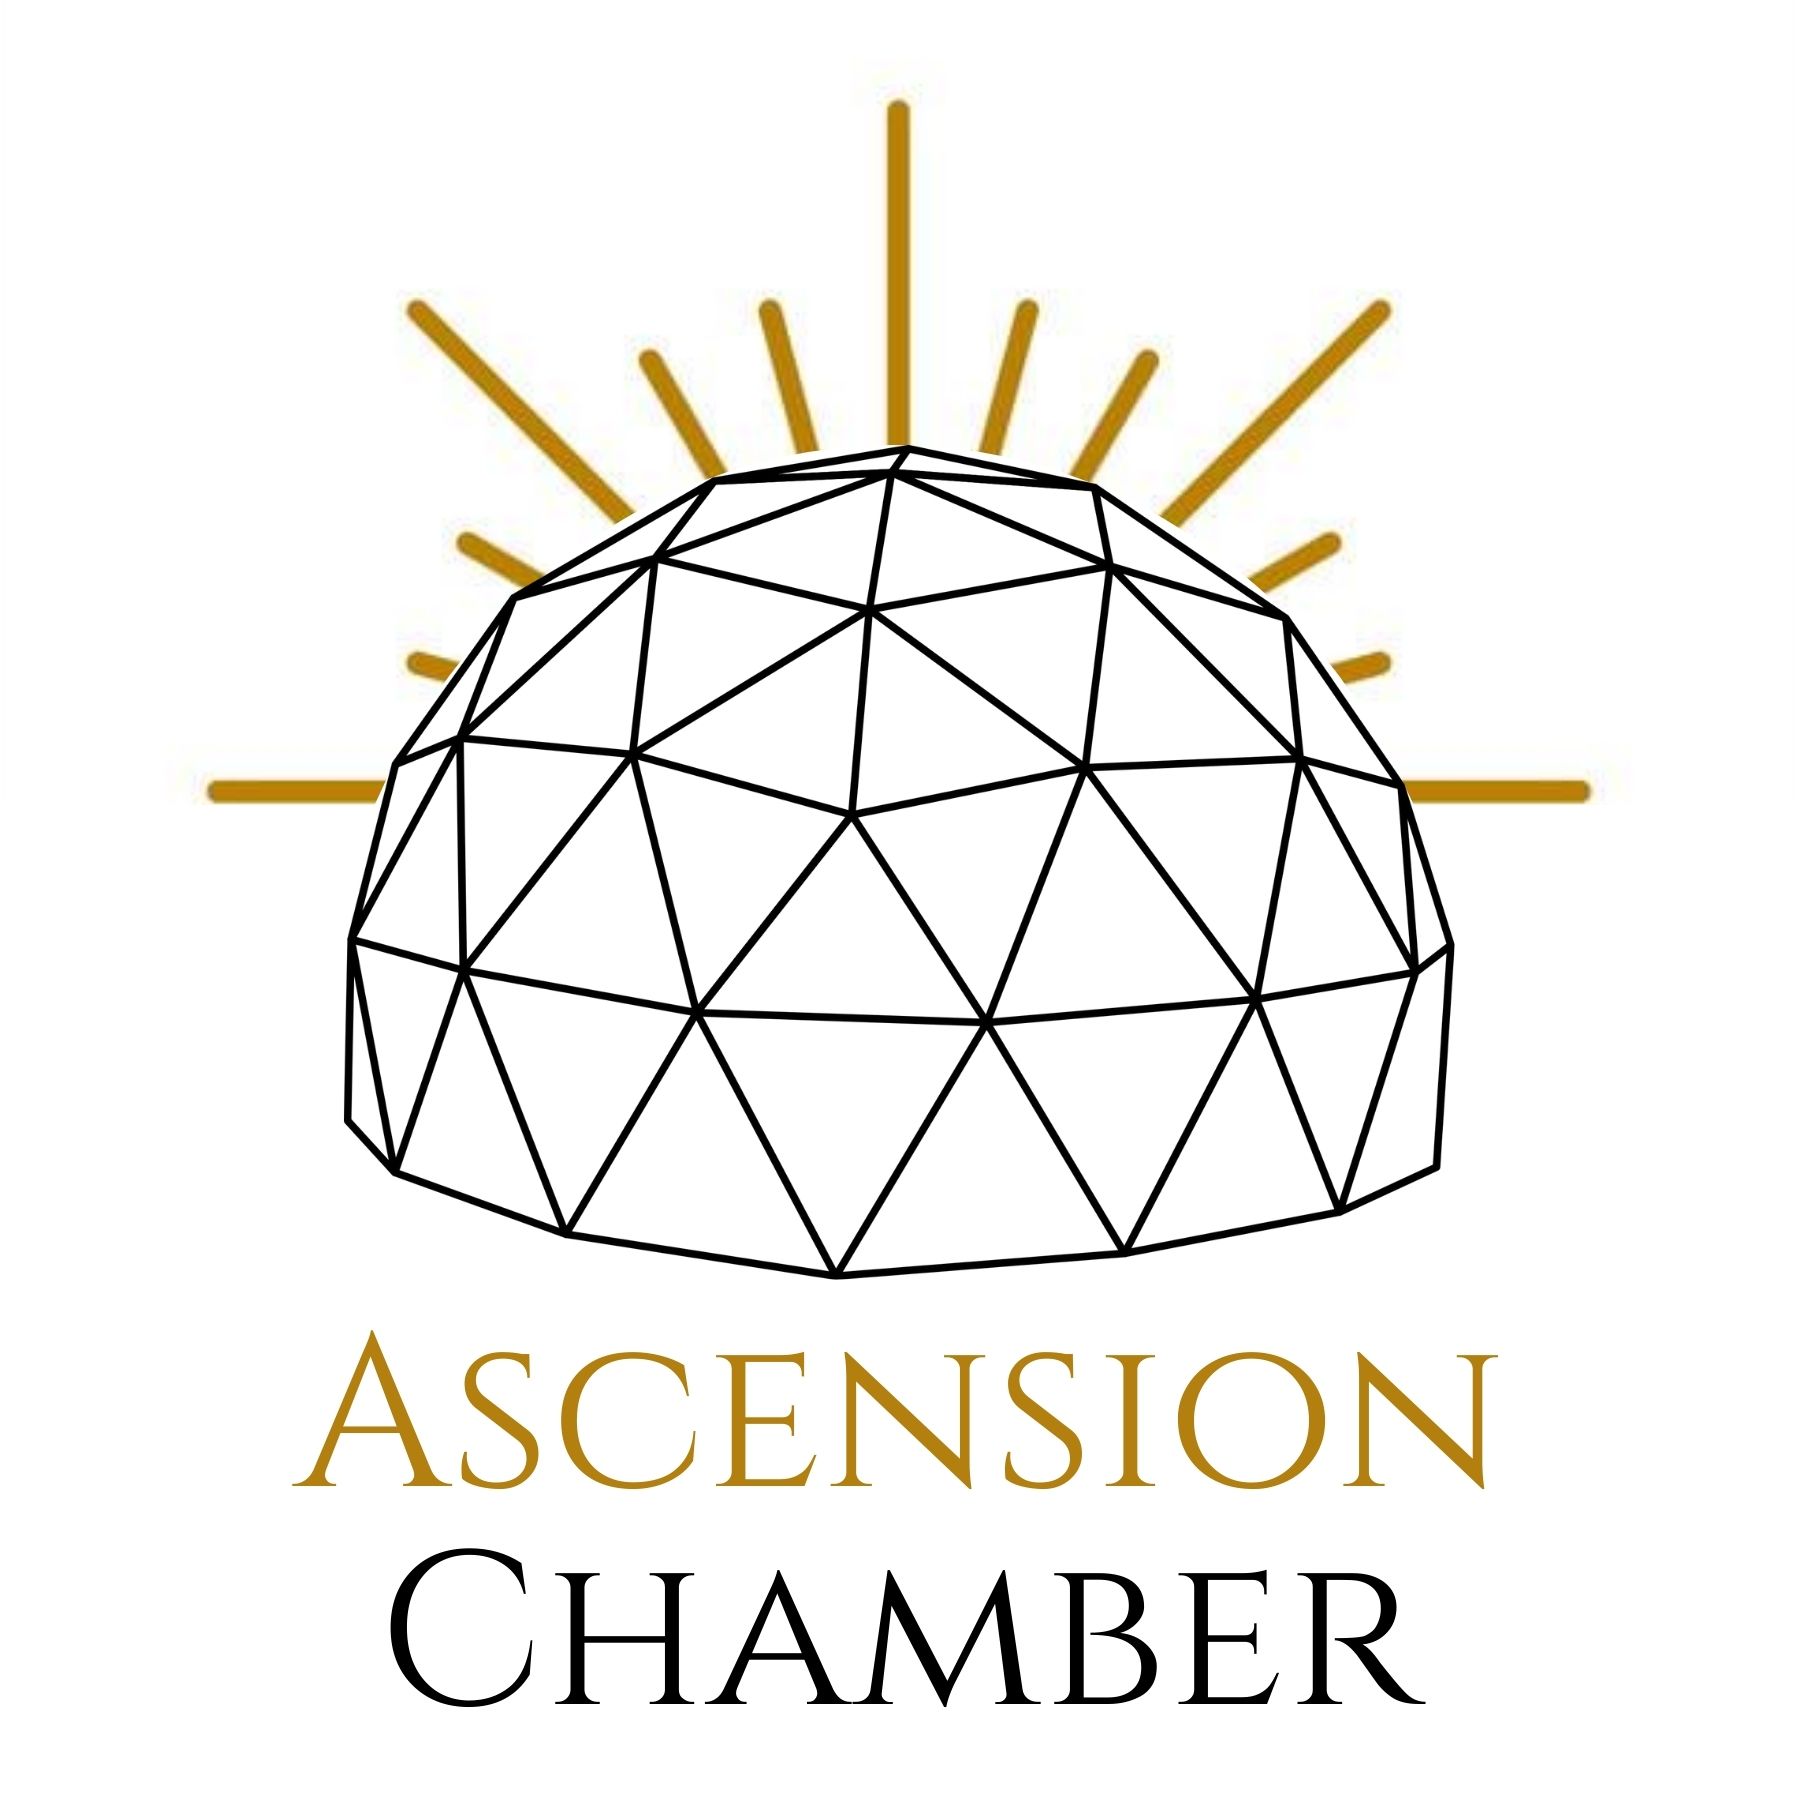 Ascension Chamber